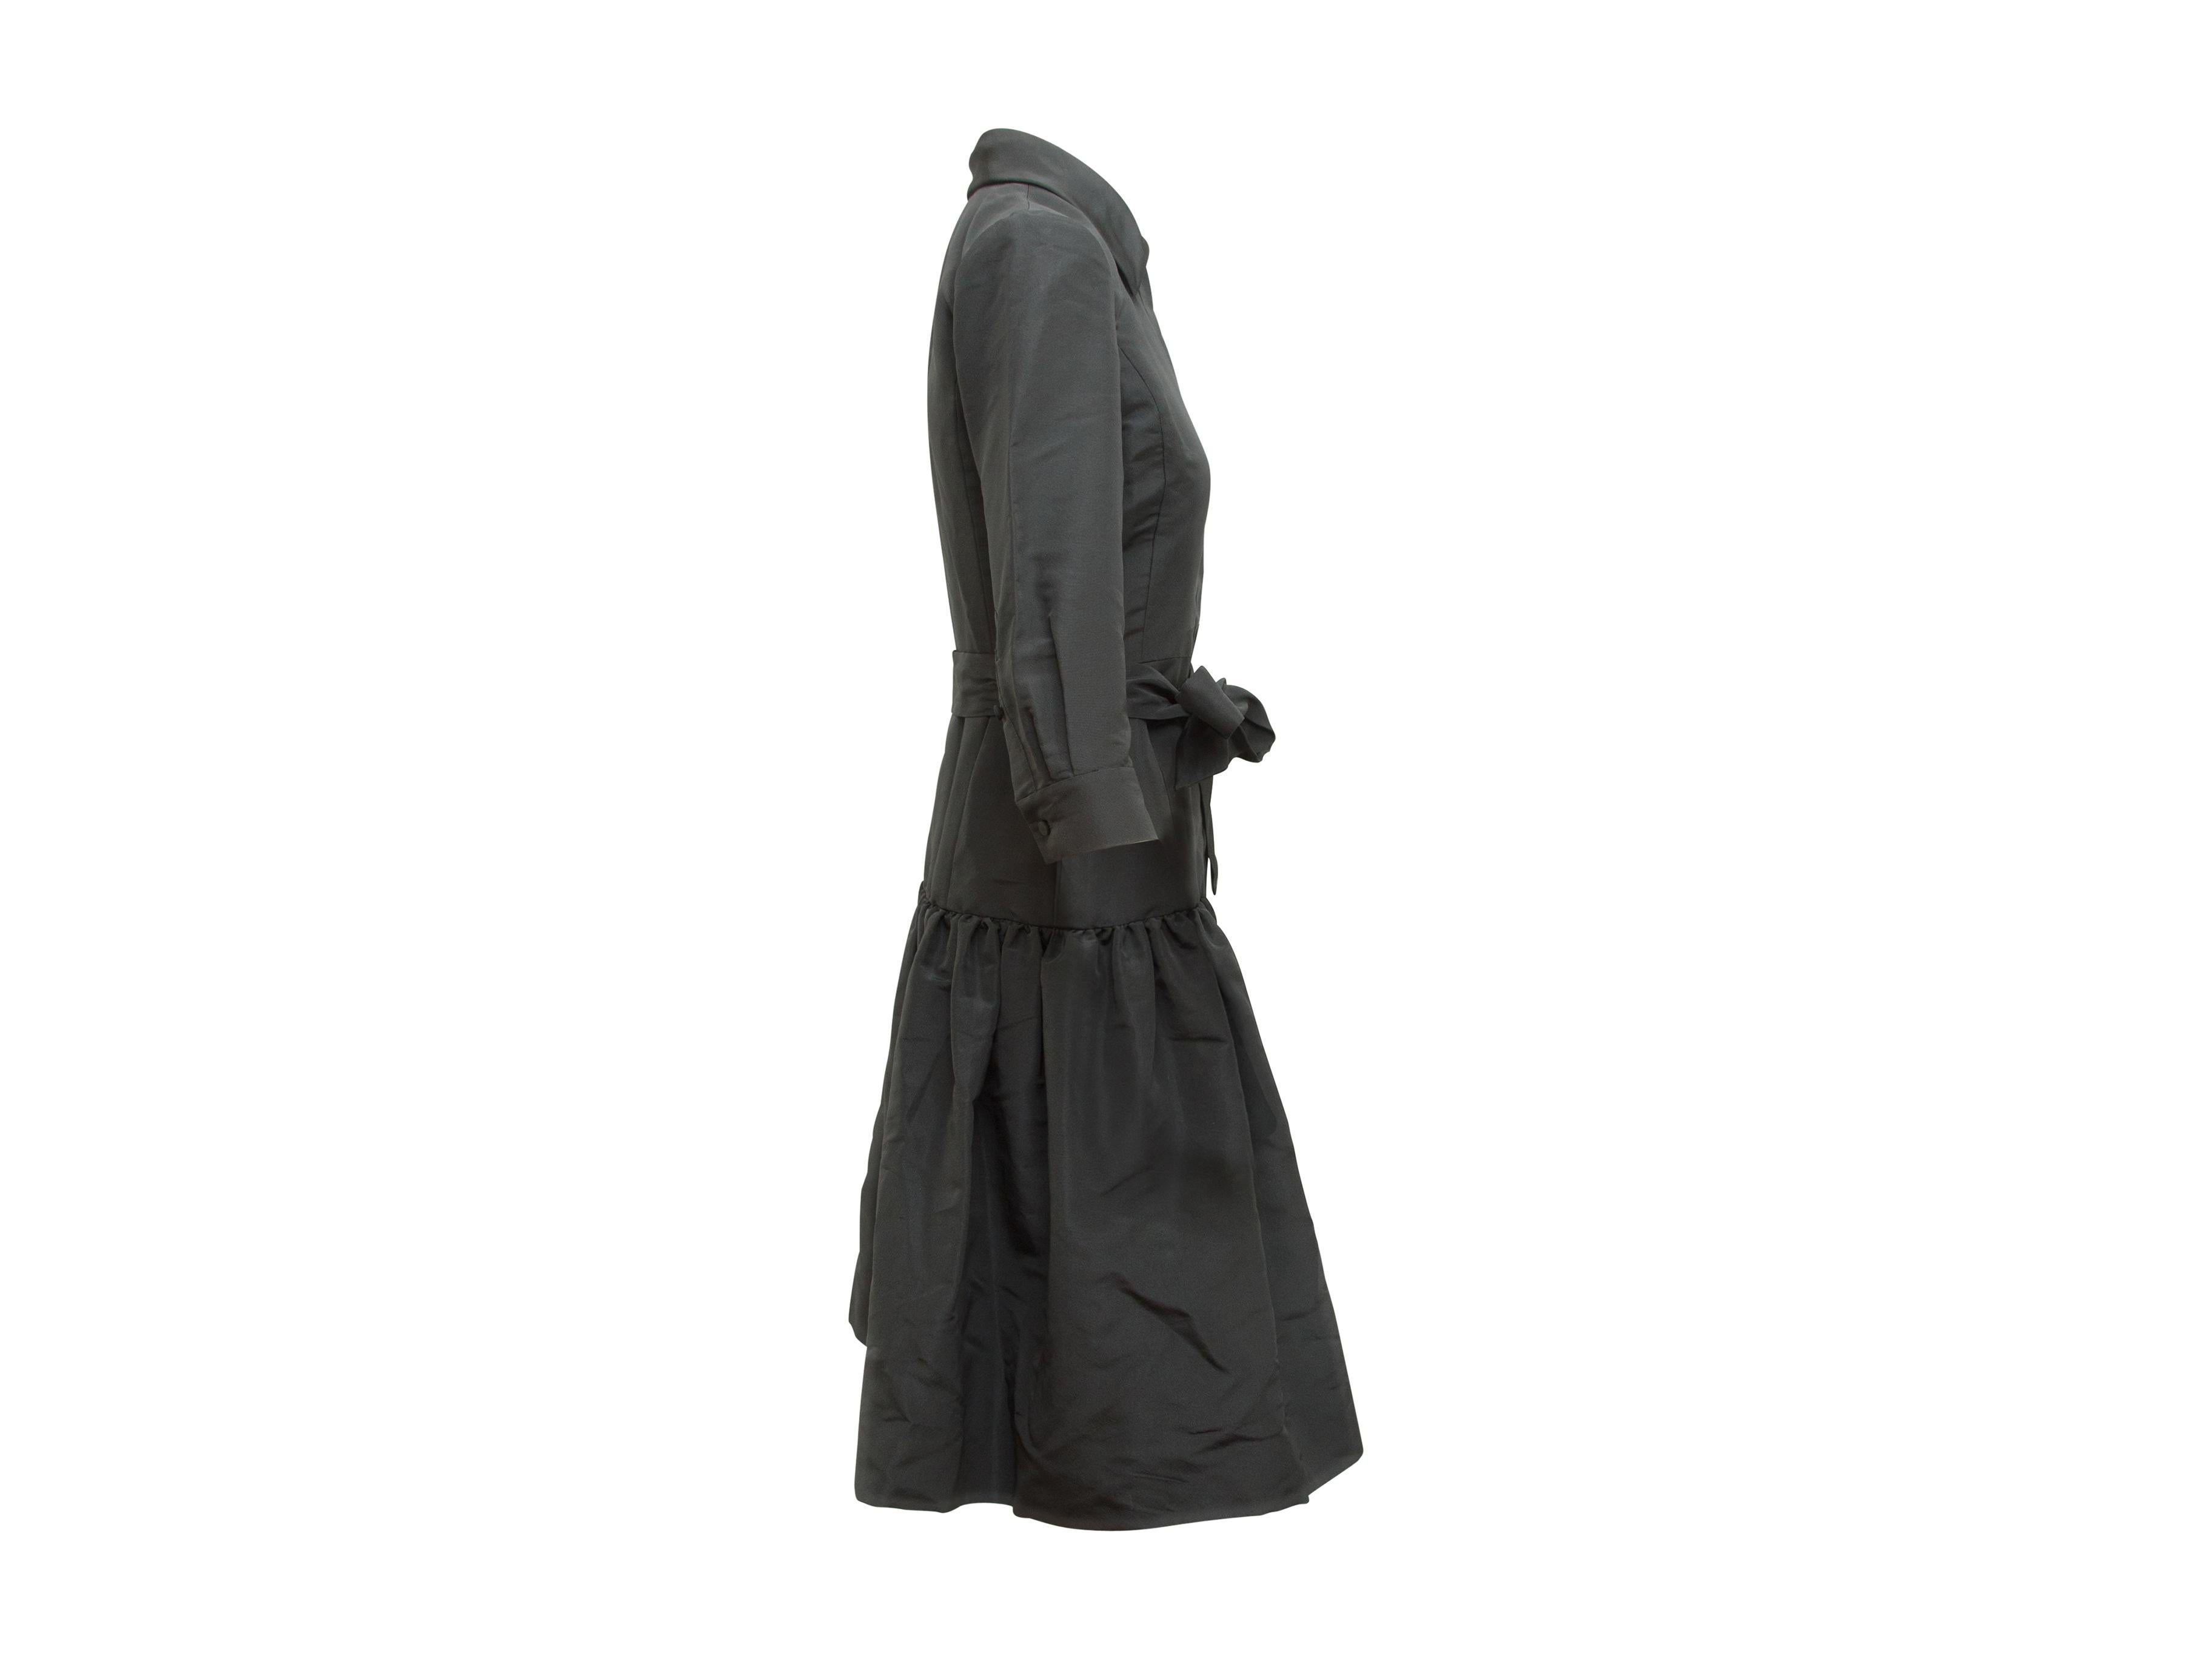 Product details:  Black drop-waist dress by Oscar de la Renta.  From the FW 2009 collection.  Spread collar.  Three-quarter length sleeves.  Two-button detail at cuffs.  Concealed button-front closure.  Self-tie belted waist.  36